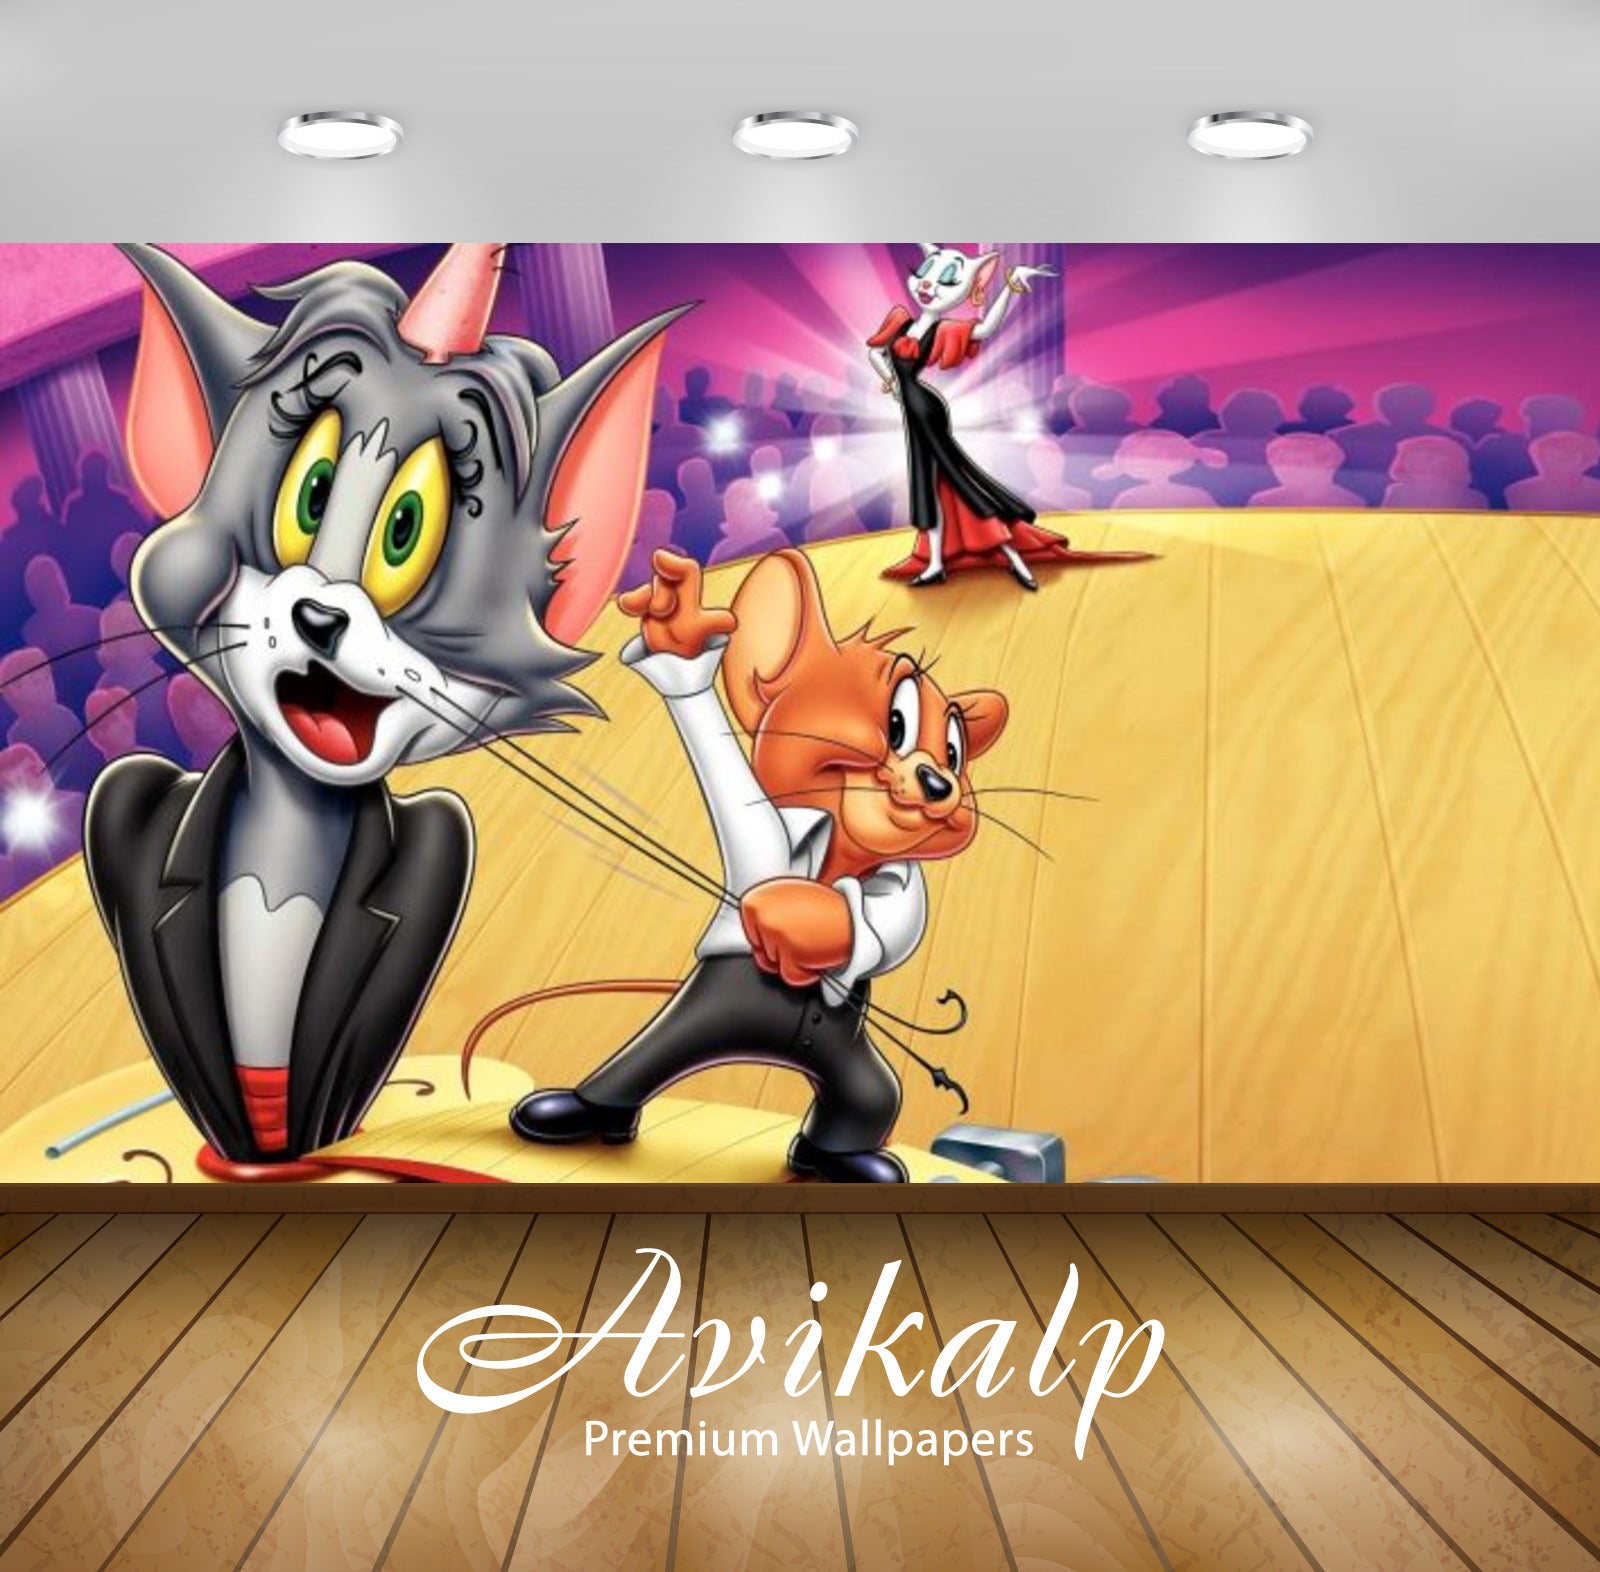 Avikalp Exclusive Awi2269 Tom And Jerry Magic show Full HD Wallpapers for Living room, Hall, Kids Ro